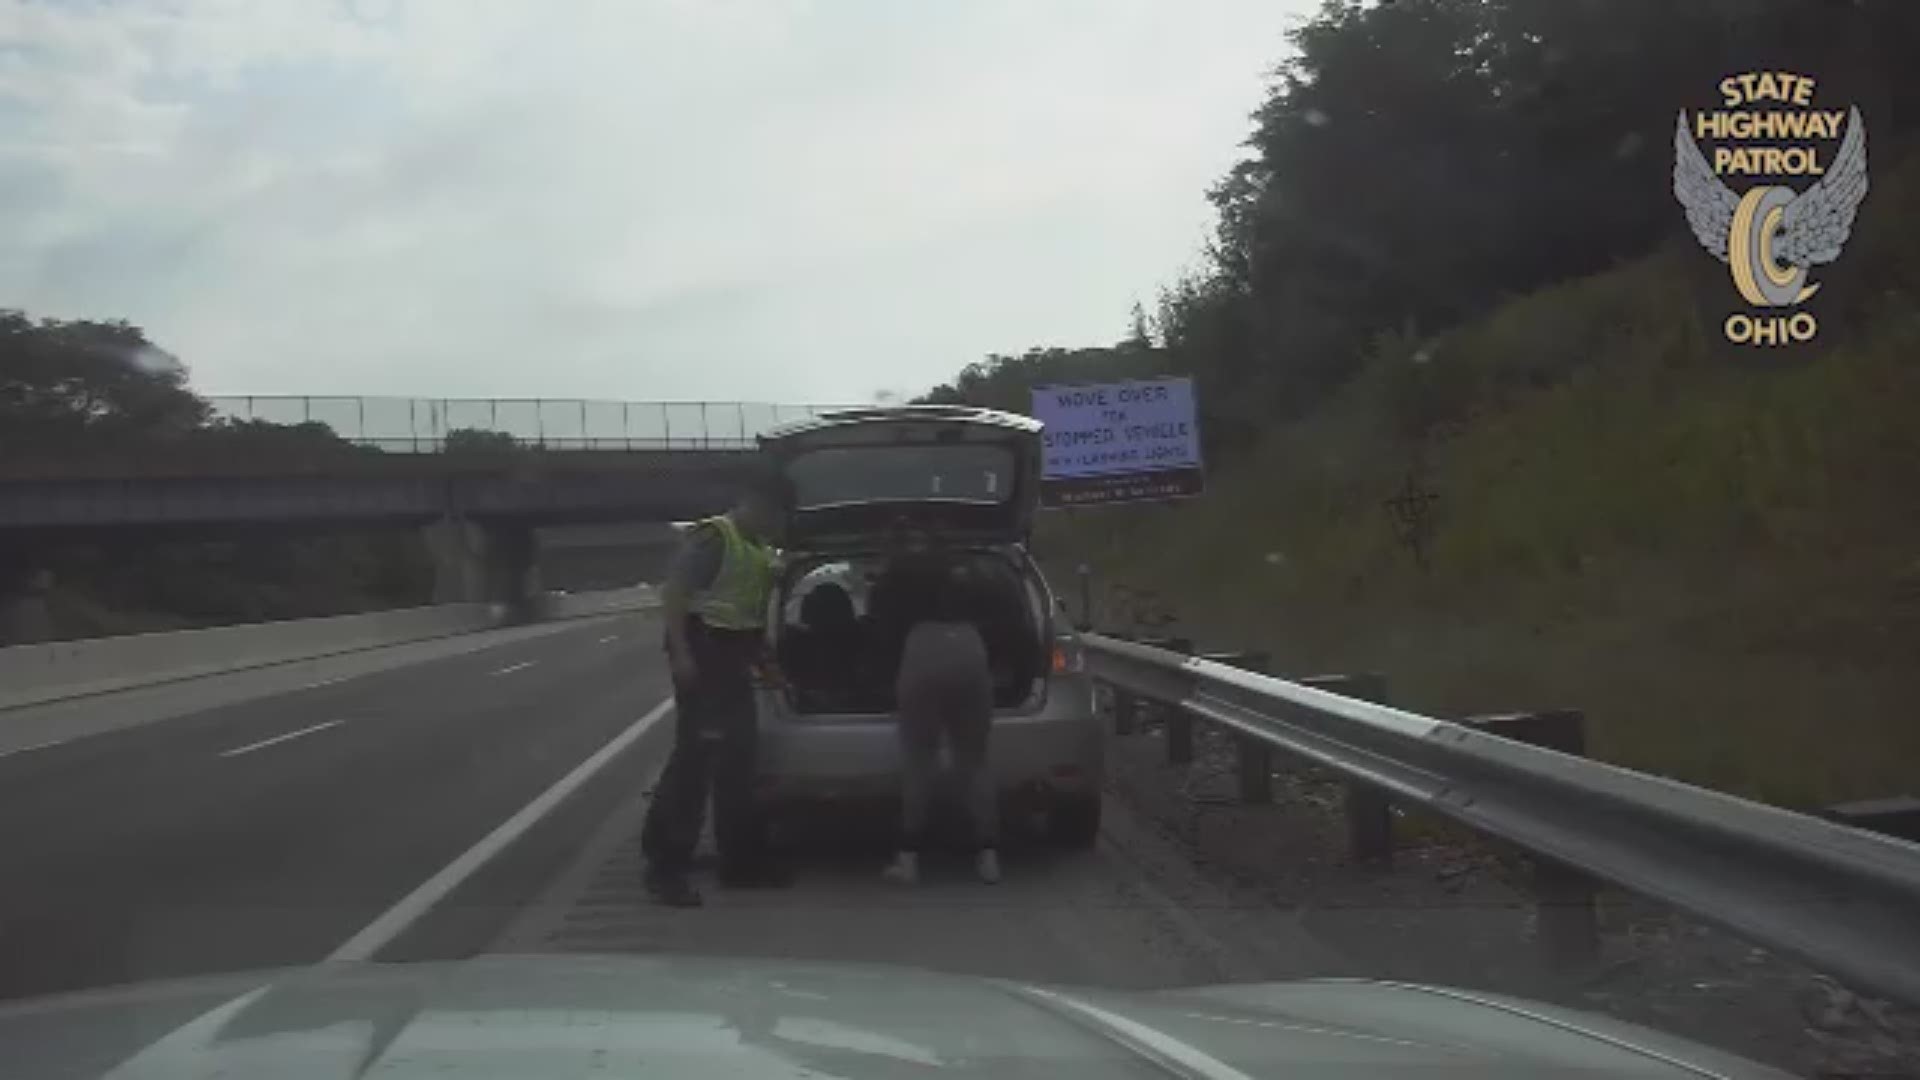 Video shows a trooper working to replace a tire on a disabled vehicle last weekend when a U-haul truck veers off the road, striking the cruiser.